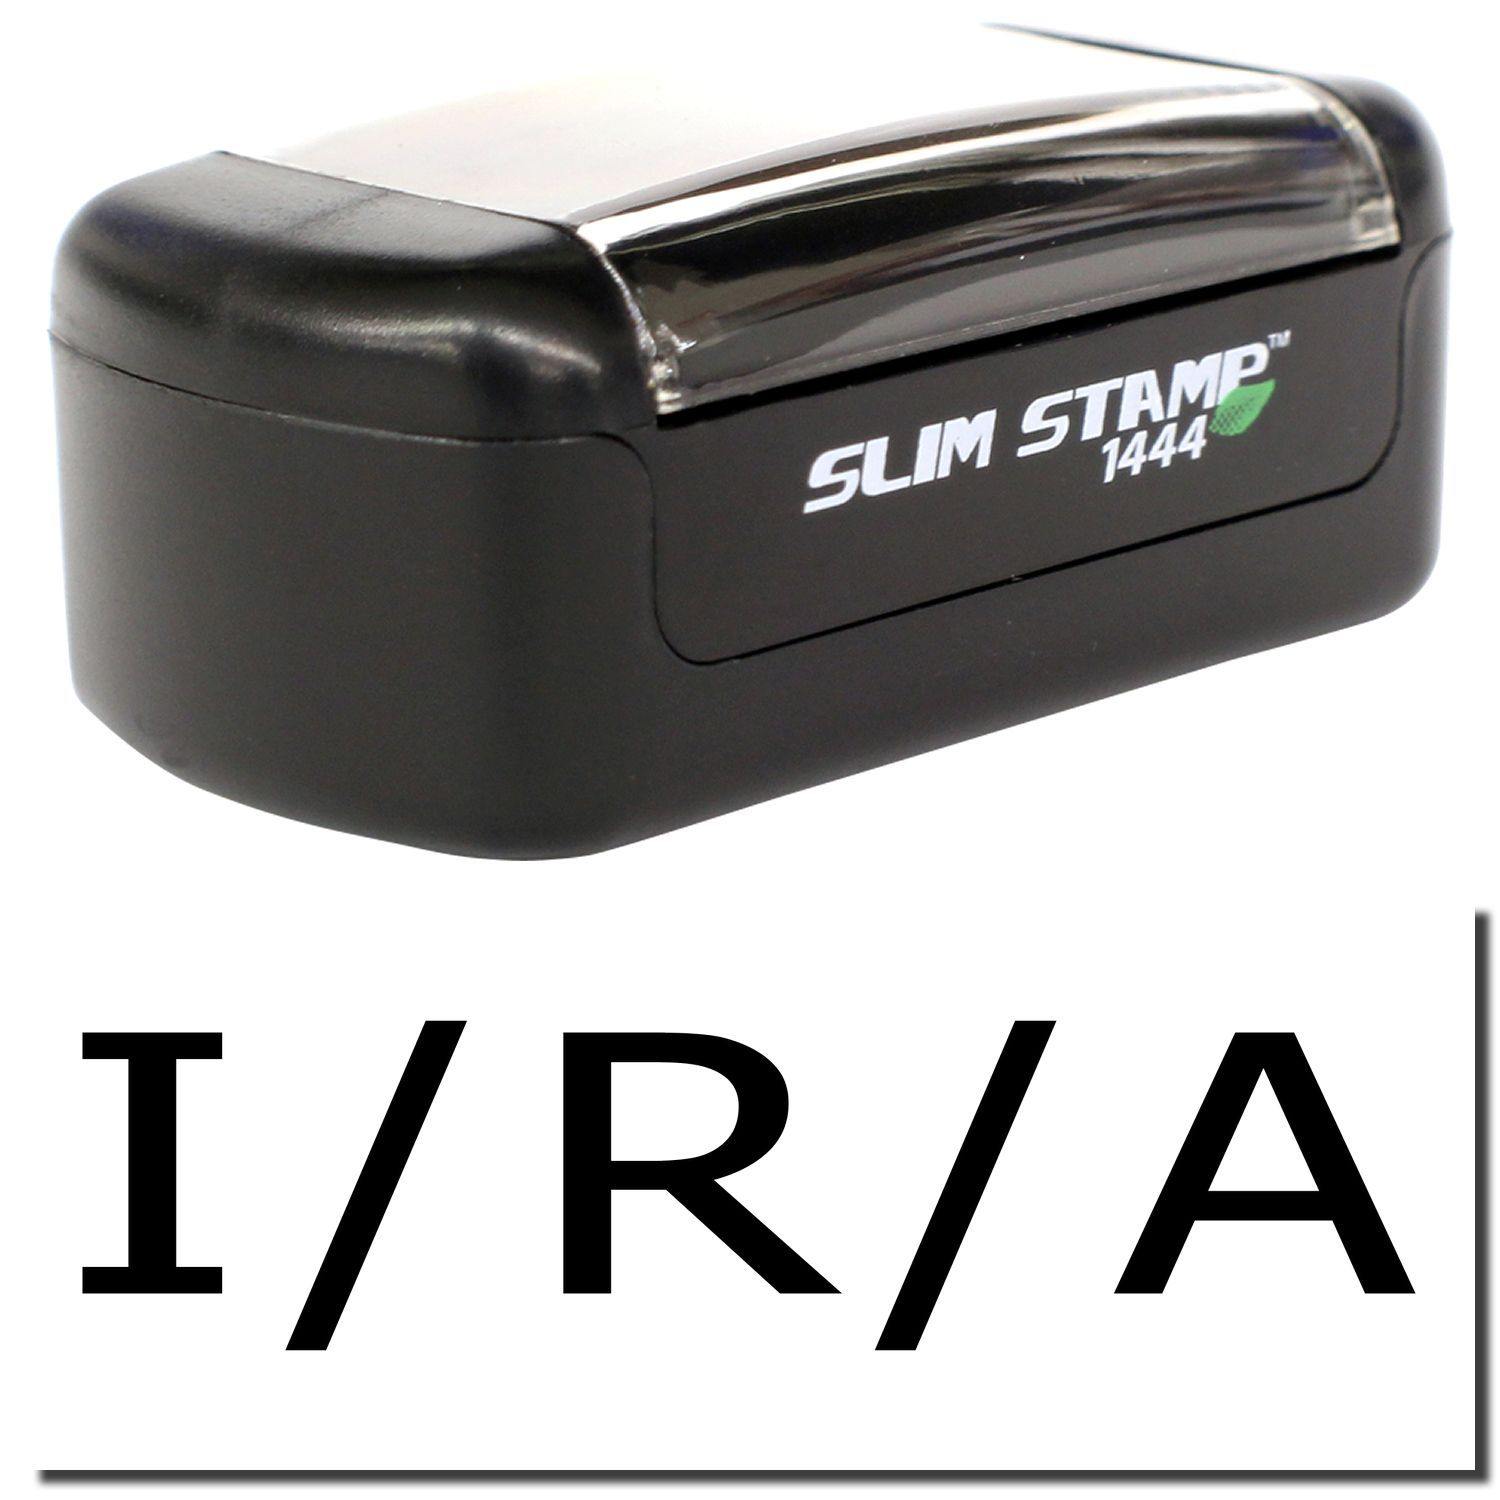 A stock office pre-inked stamp with a stamped image showing how the text "I/R/A" is displayed after stamping.